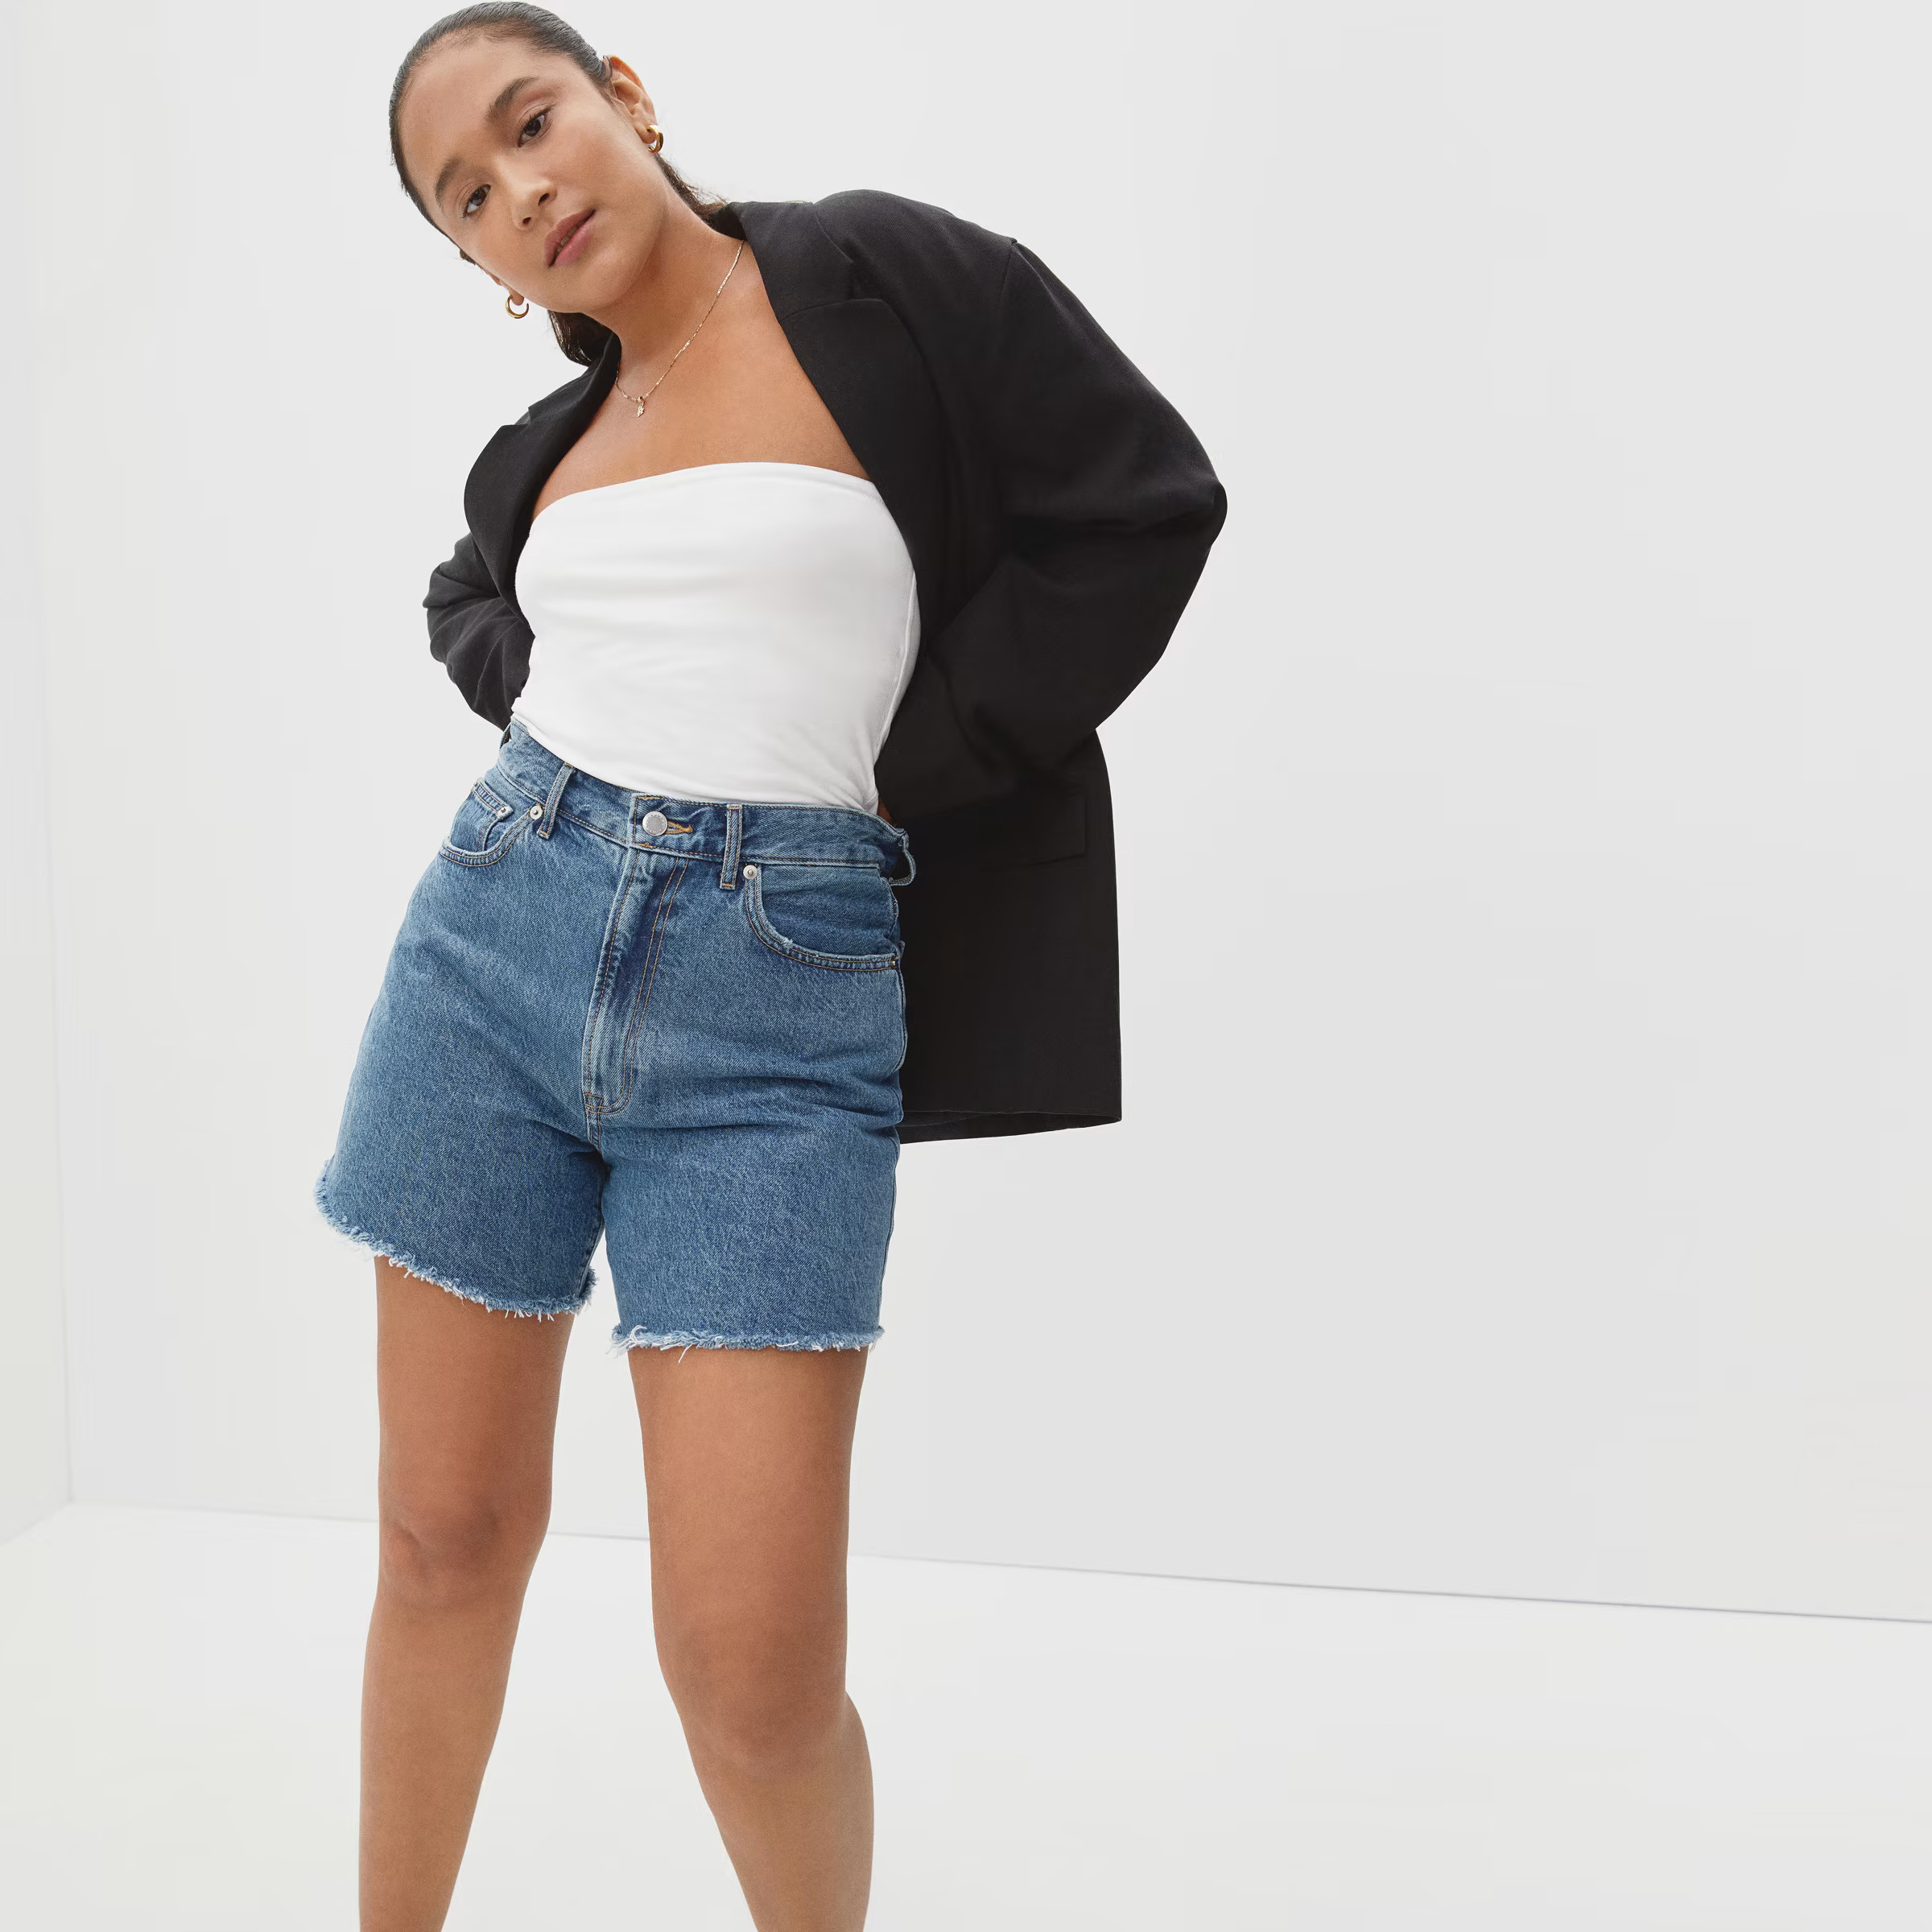 The Best Summer Pieces by Everlane That Are Sustainable